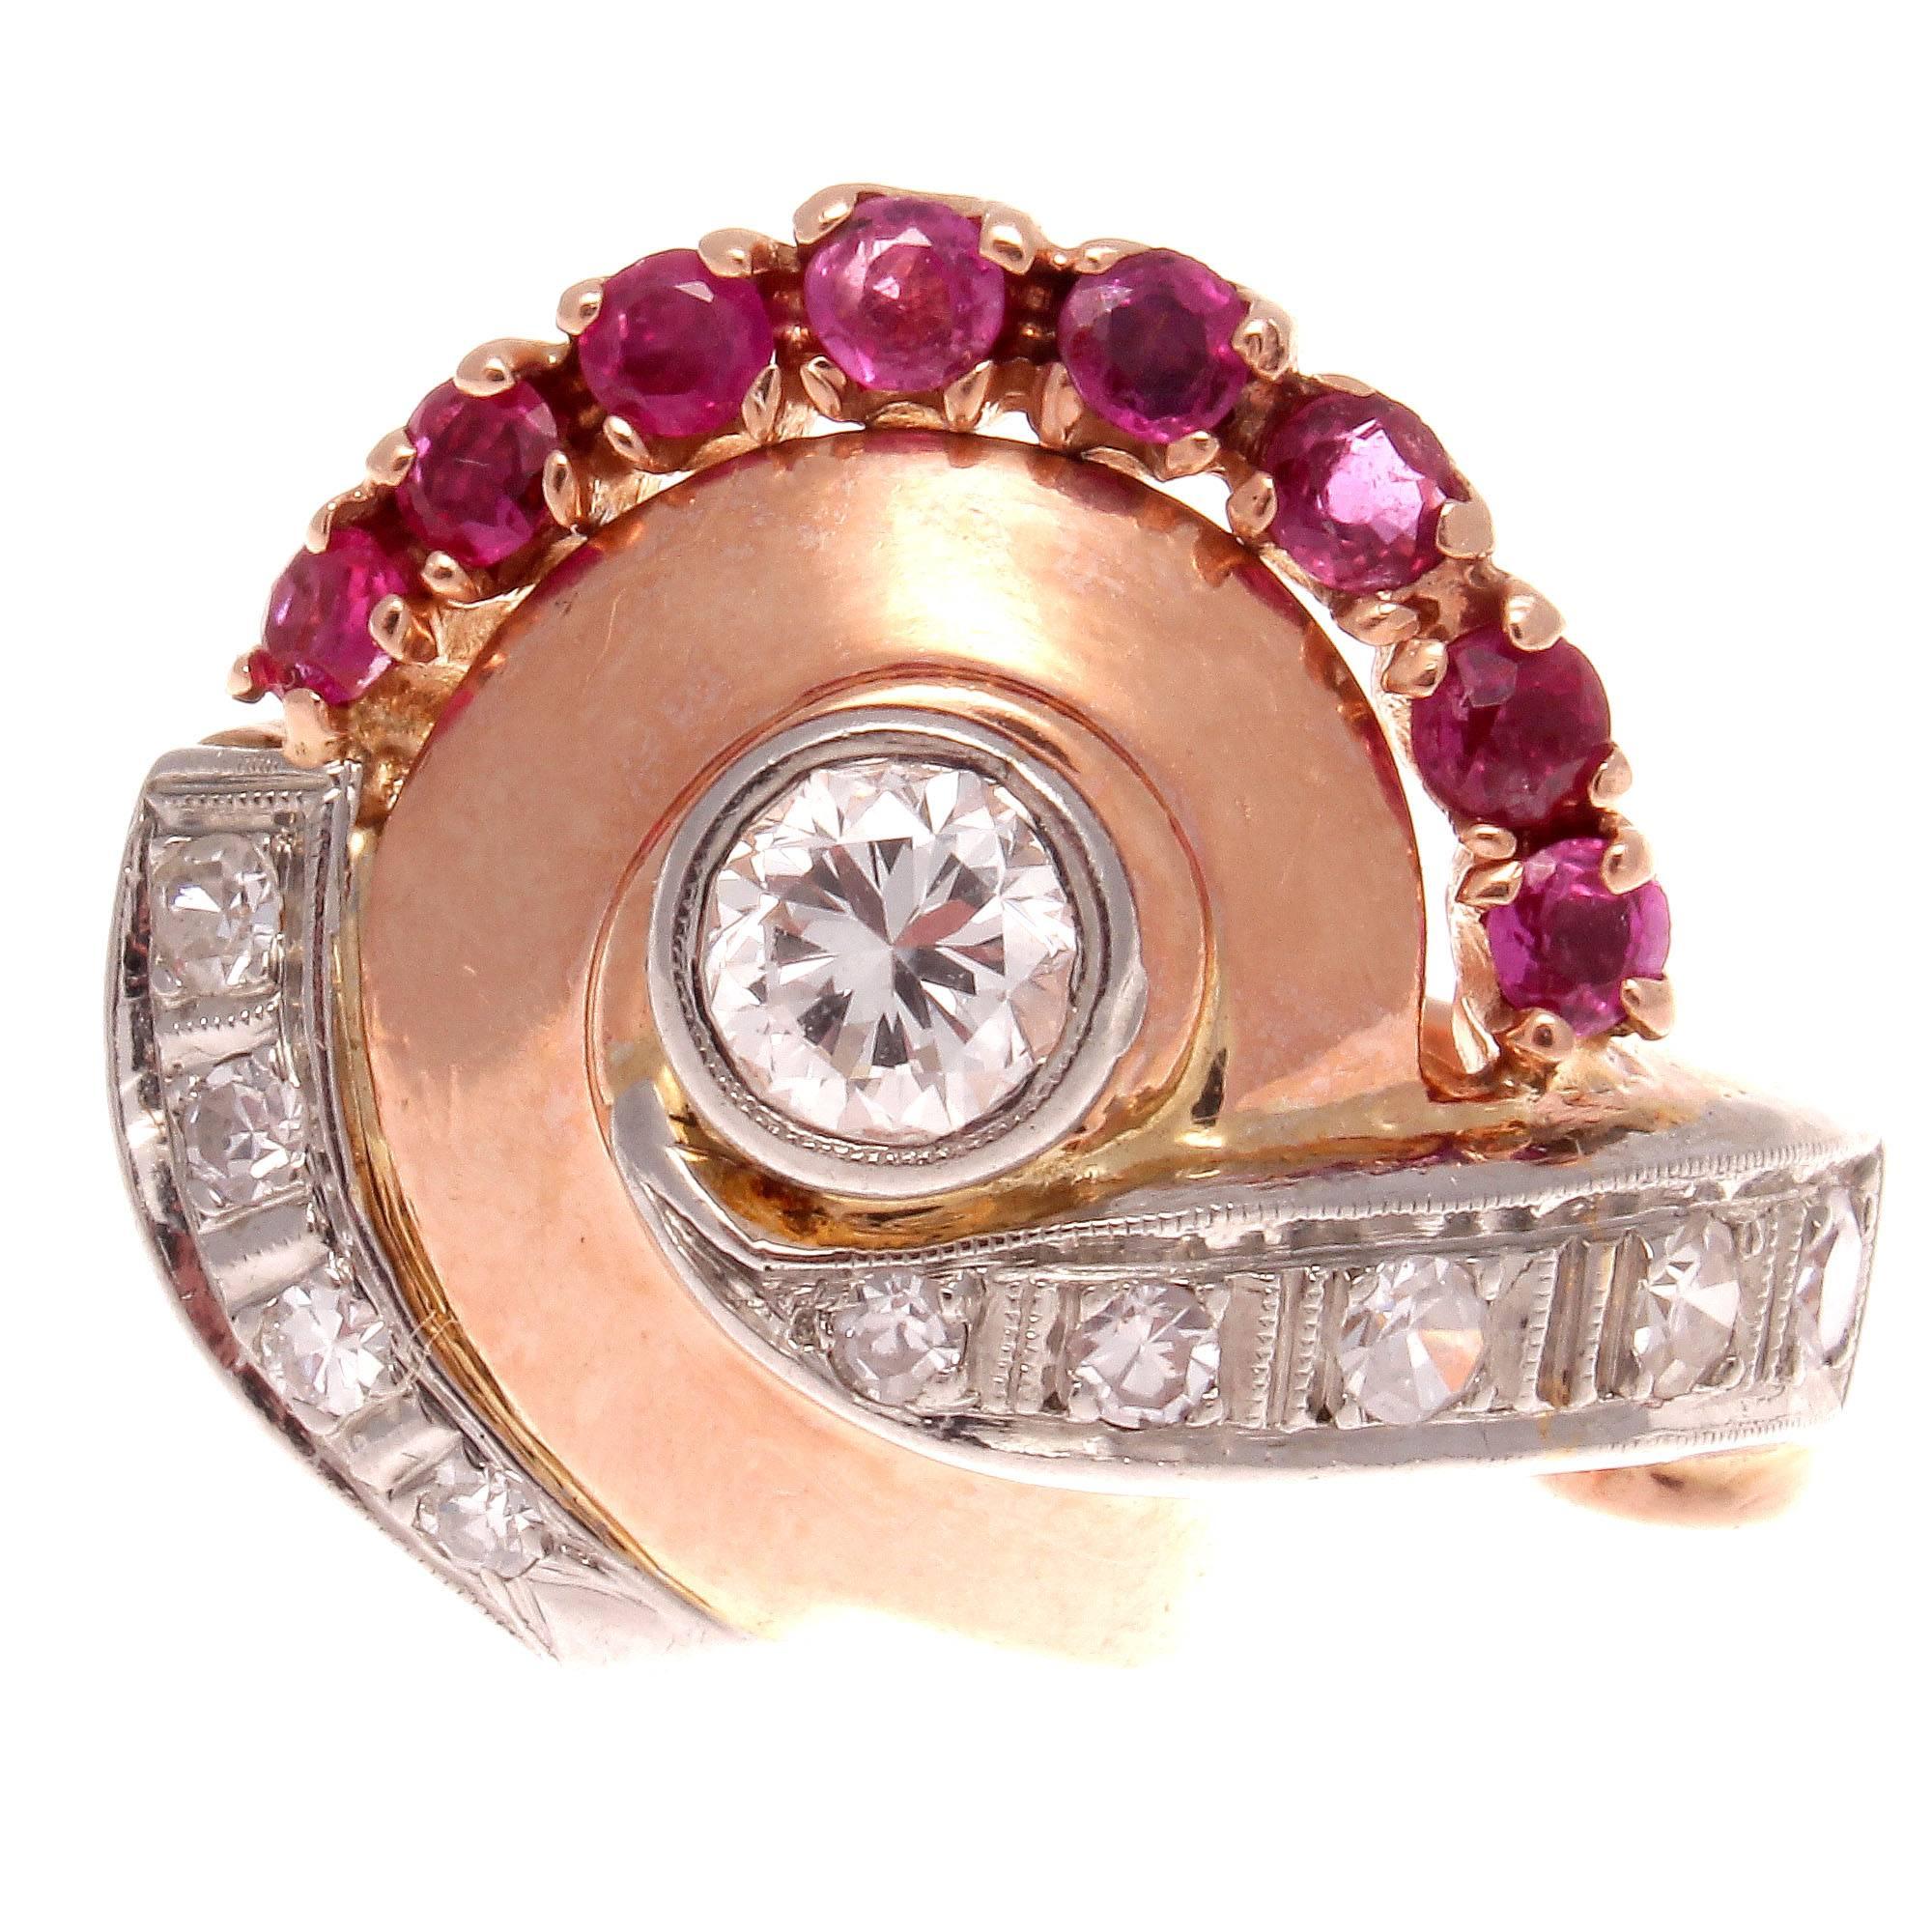 Retro jewelry is defined by bold designs and colorful gemstones. Featuring a swirl of fascination that is created with numerous near colorless diamonds and vibrant red rubies. Designed with the classic use of 14k pink gold.

